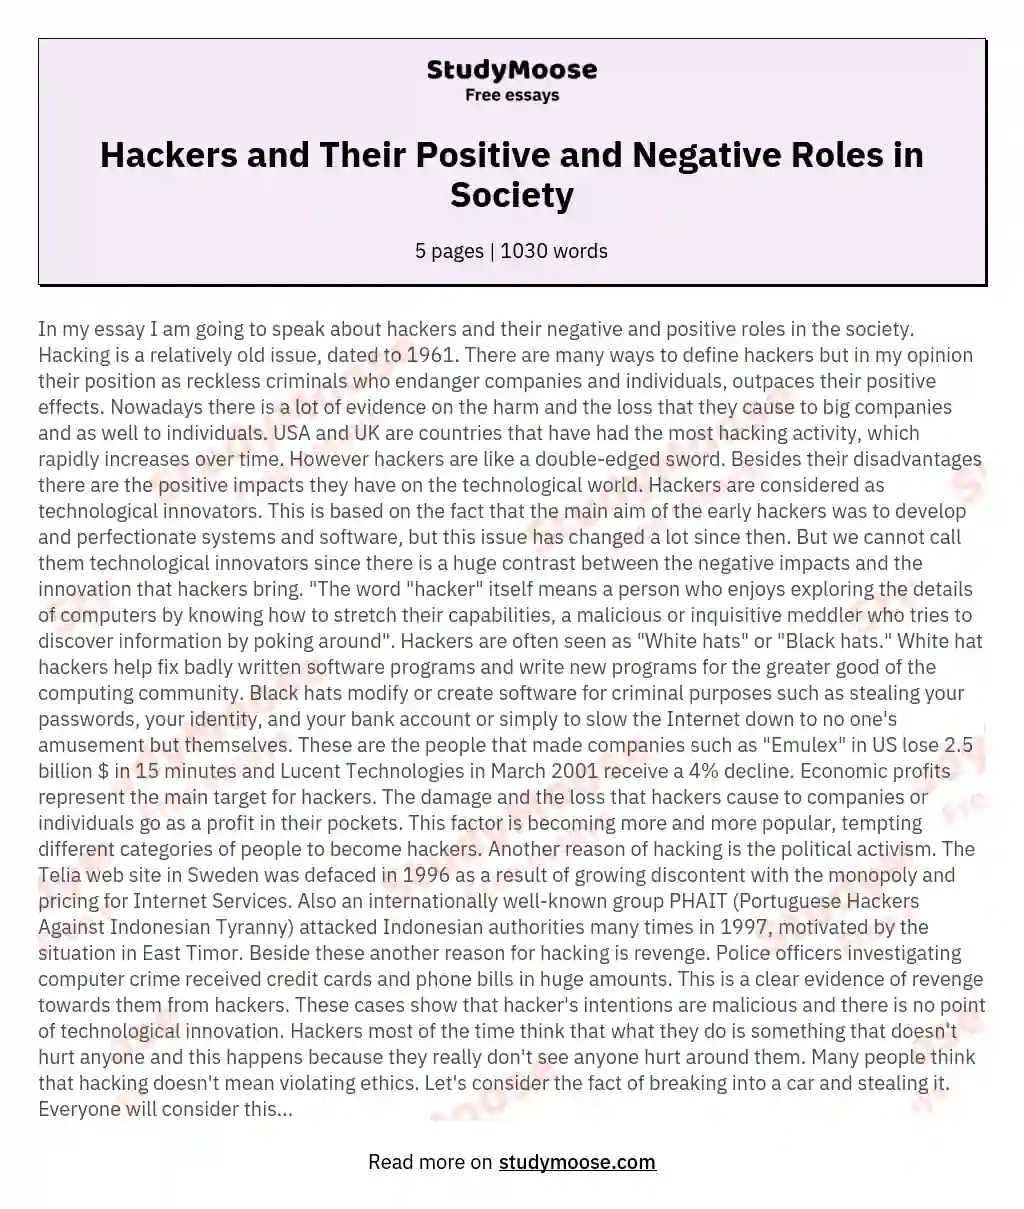 Hackers and Their Positive and Negative Roles in Society essay